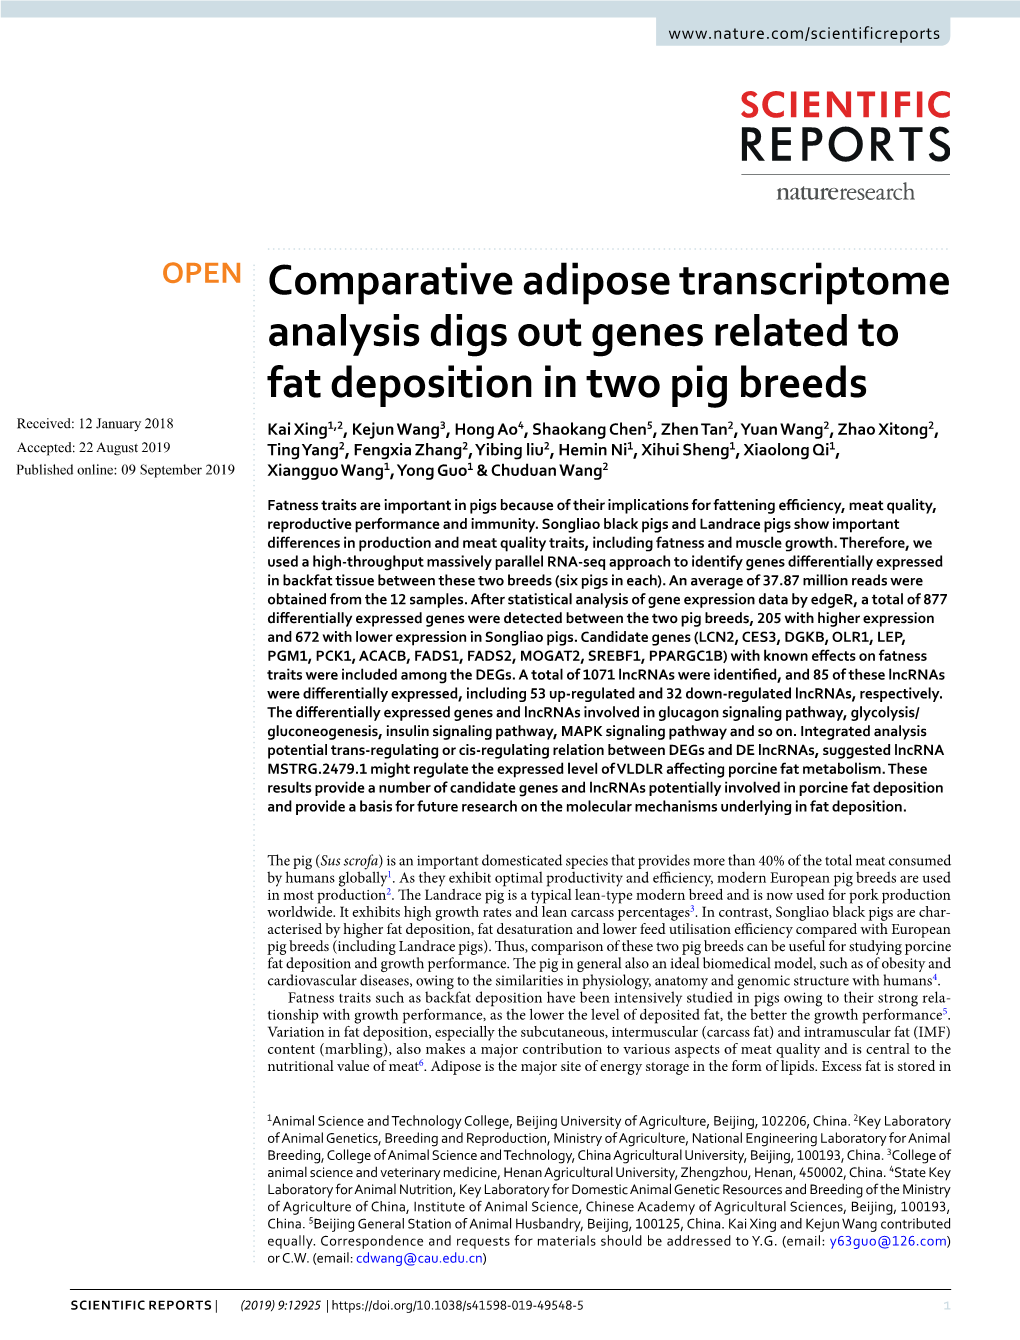 Comparative Adipose Transcriptome Analysis Digs out Genes Related To